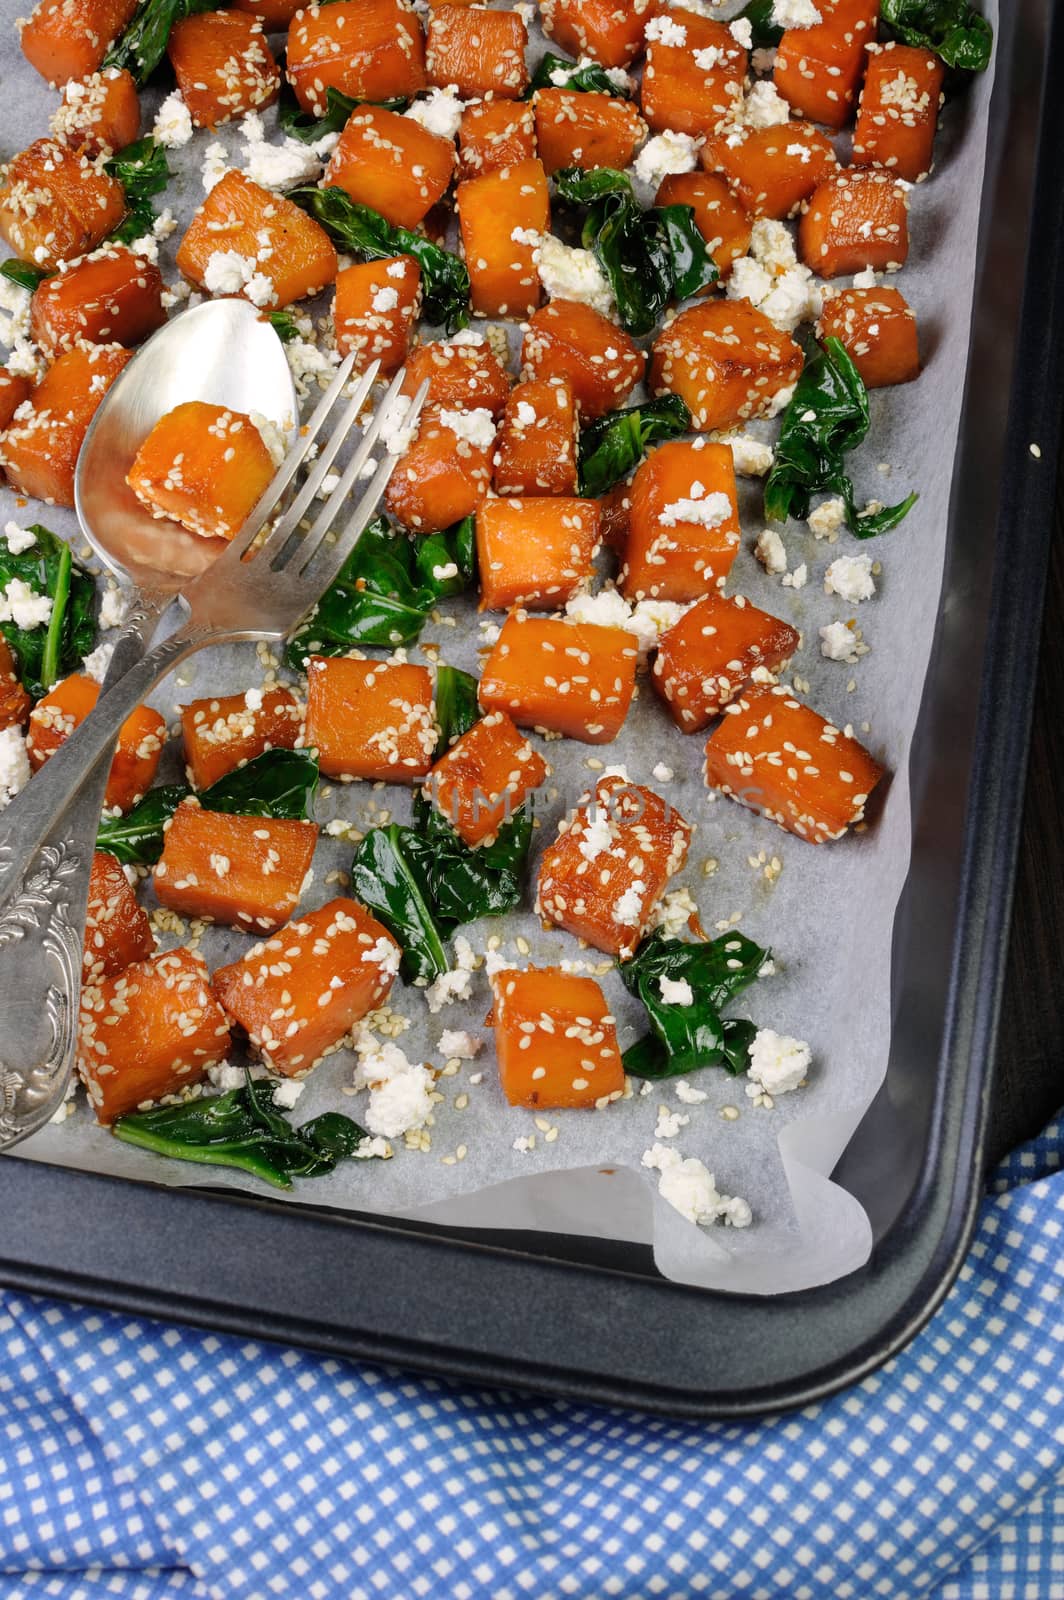 Slices of pumpkin baked with spinach and sesame seeds on a baking sheet